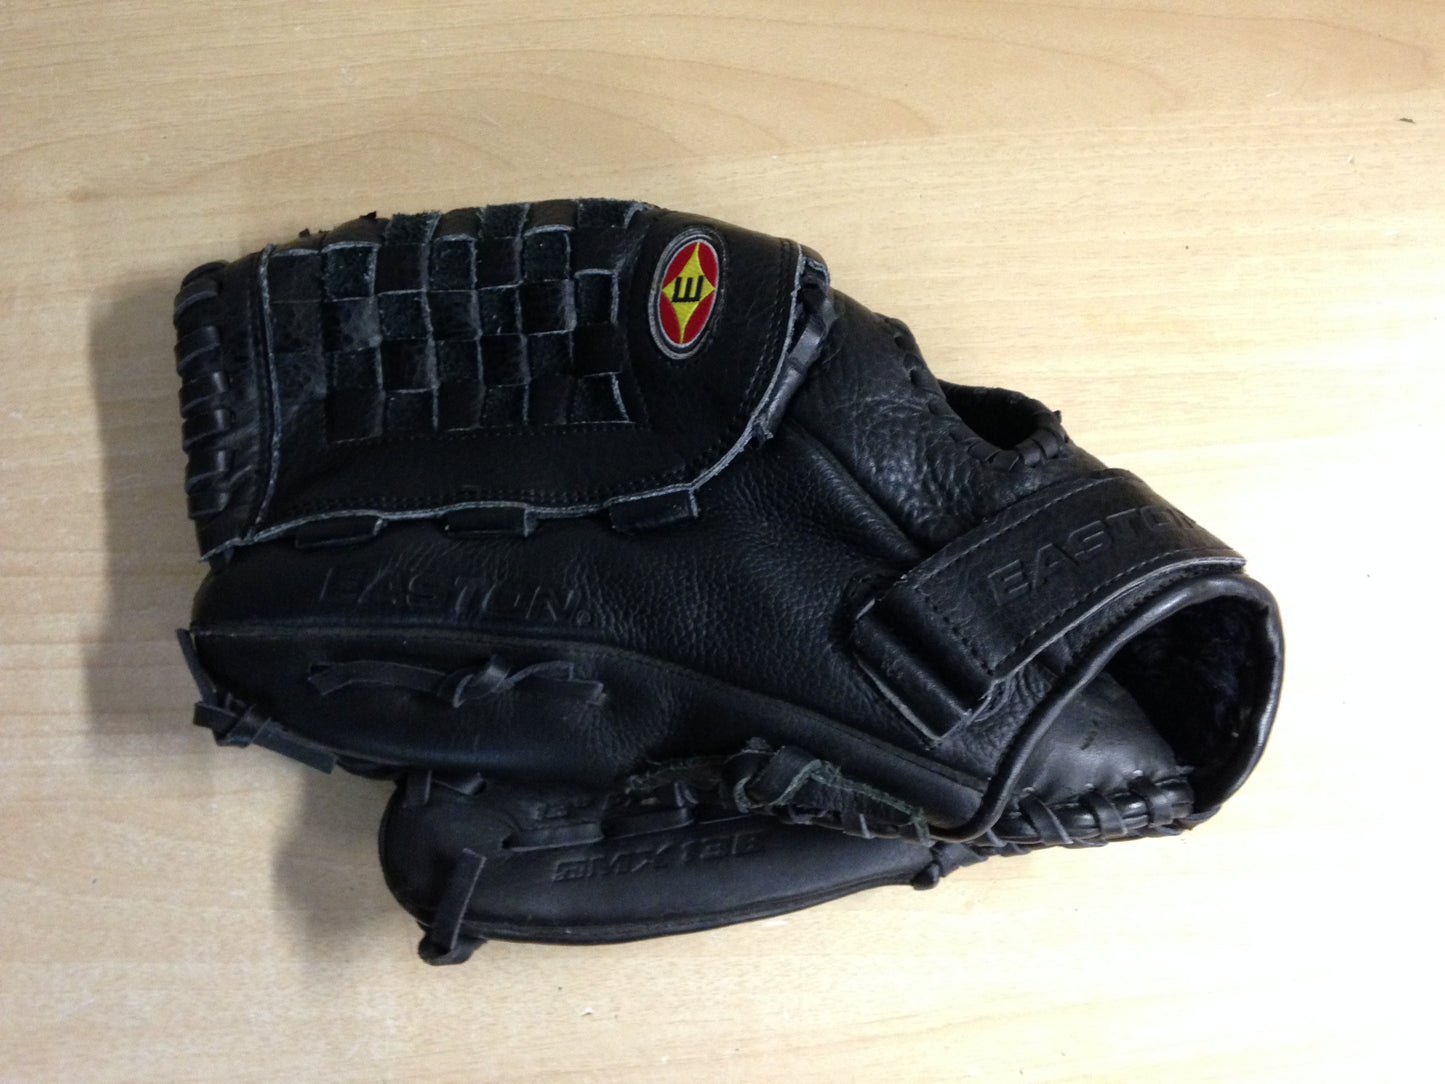 Baseball Glove Adult Size 13 inch Easton Black Leather Fits on RIGHT Hand Excellent